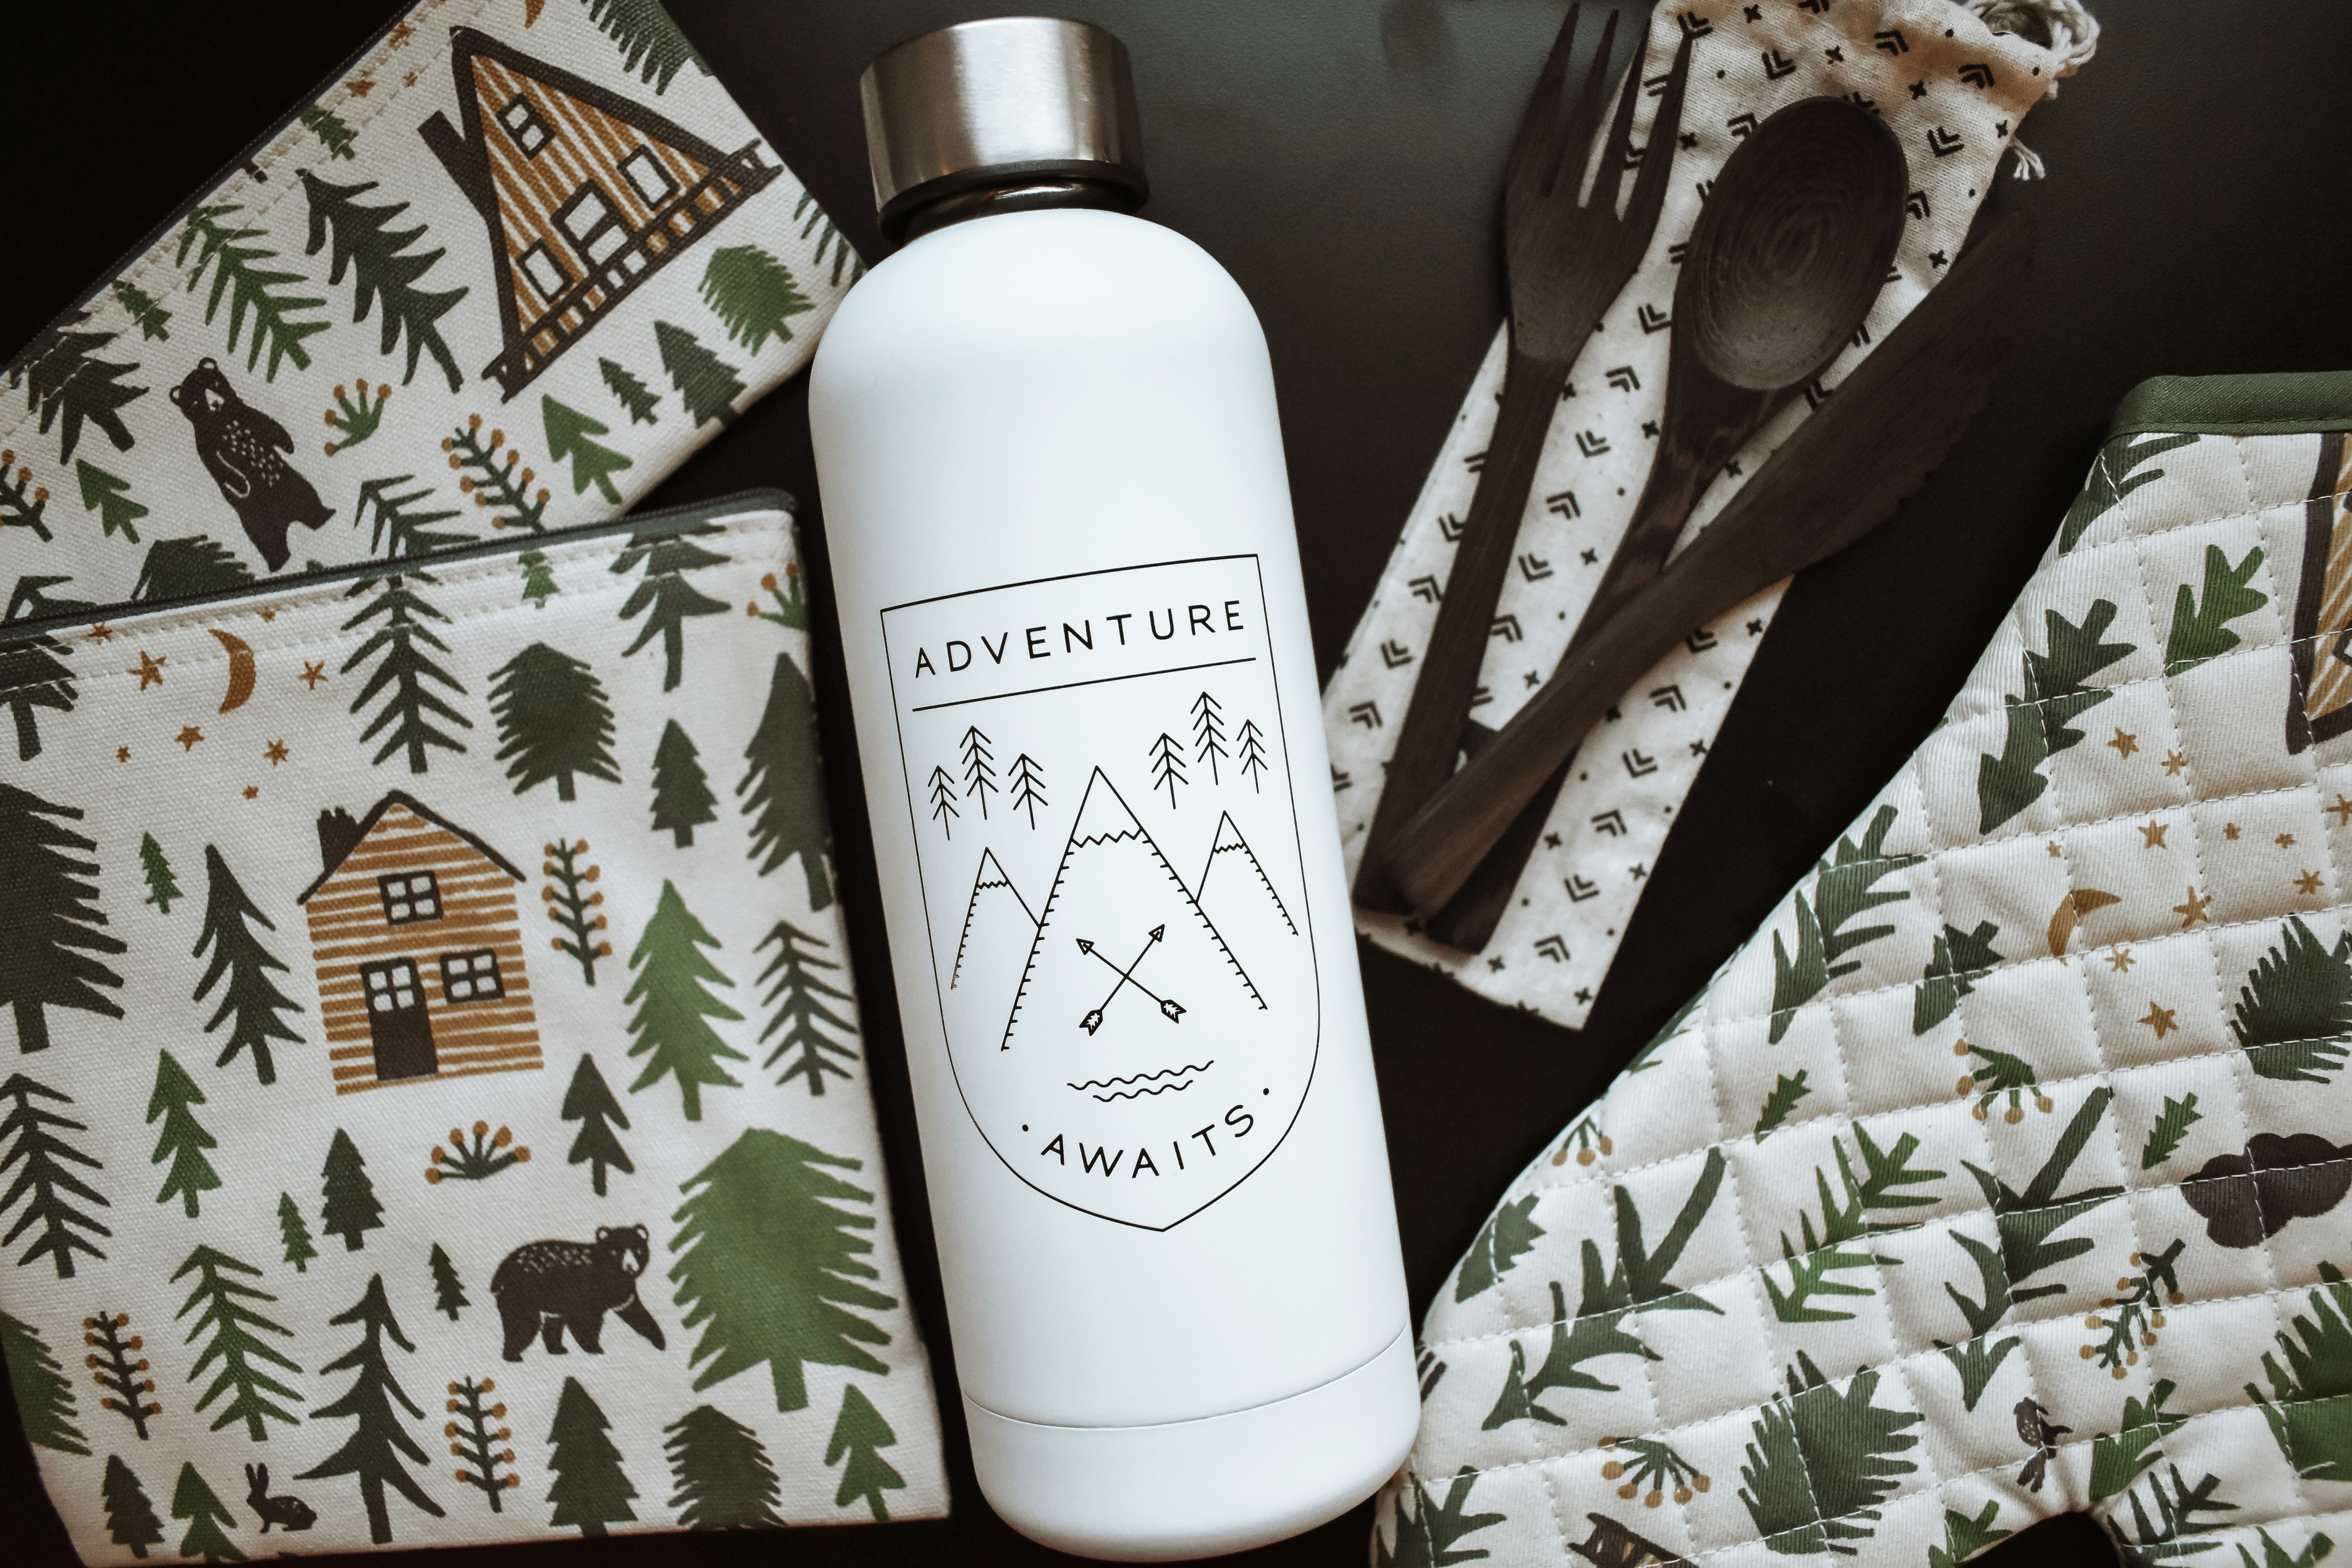 Adventure awaits water bottle flatlay with rustic cabin themed kitchen and camping products and wooden utensils.